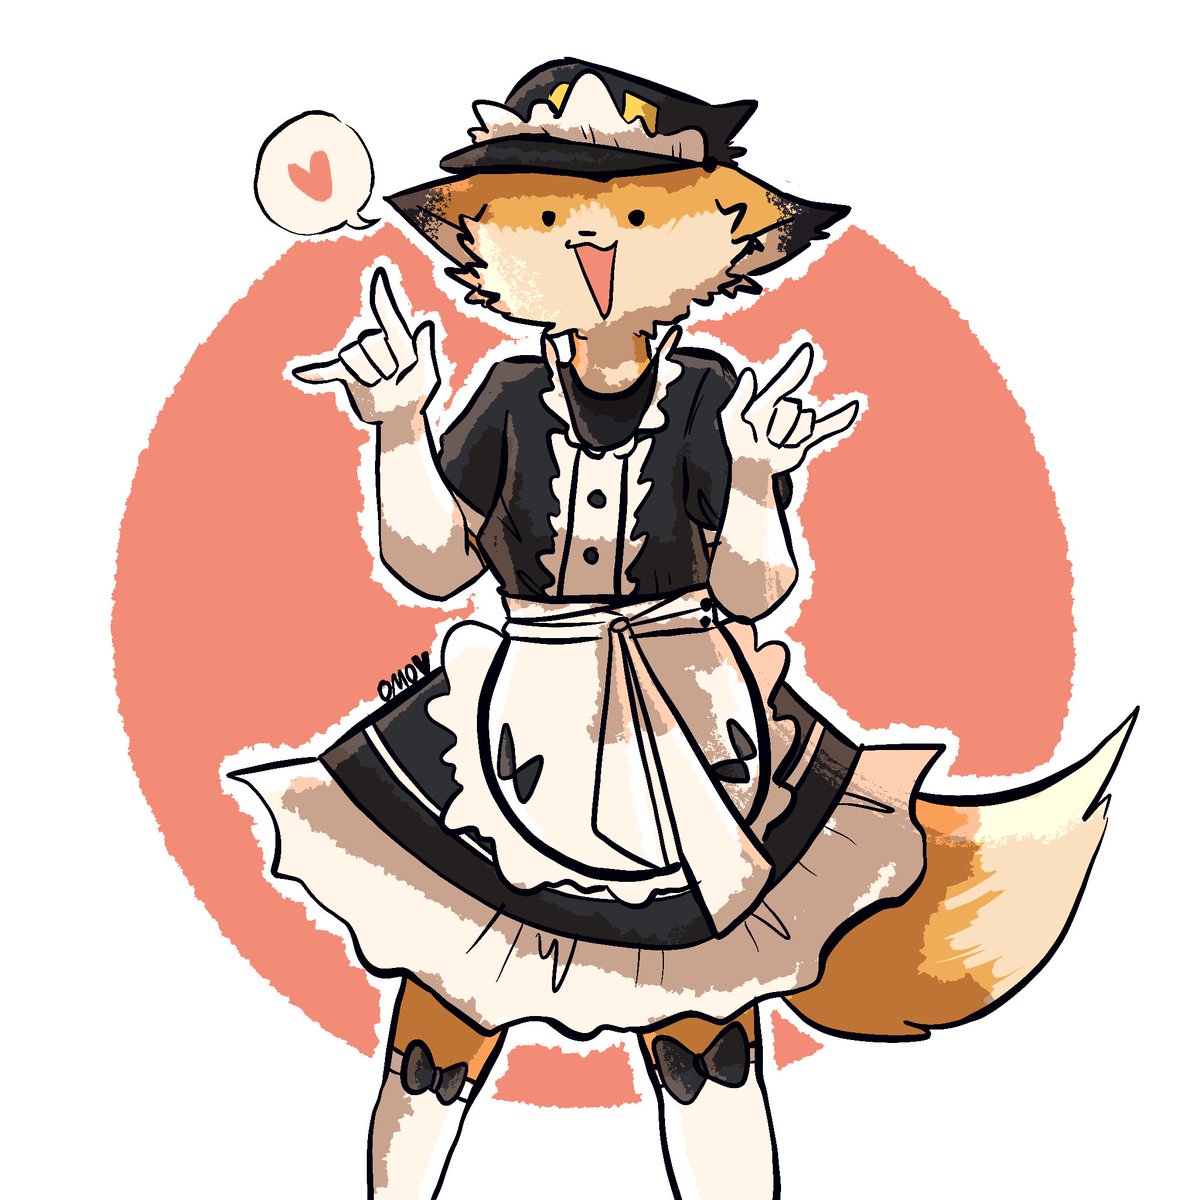 fundy as a maid, ik he said hes not a furry but i just wanted to